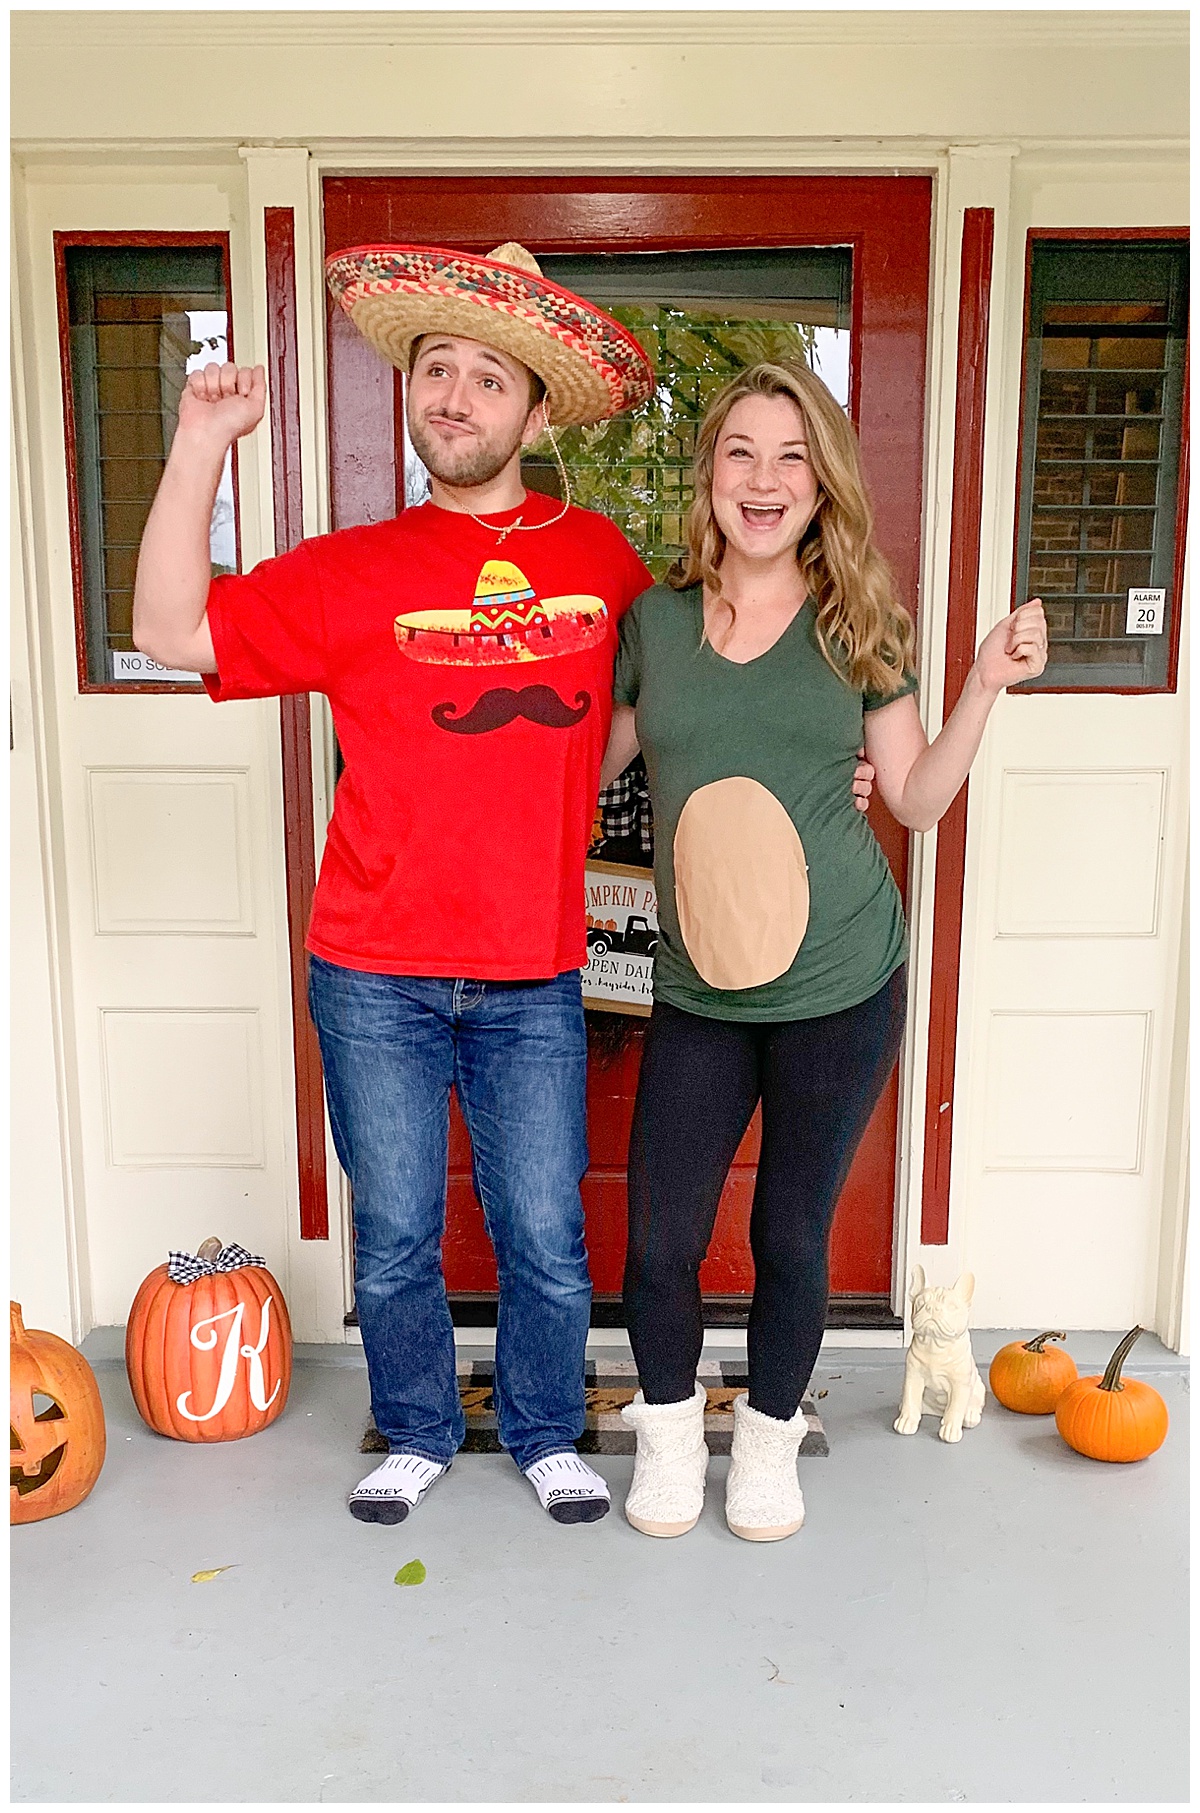 Halloween 2019: Trick or Treat: From Your Favorite Salsa and Avocado